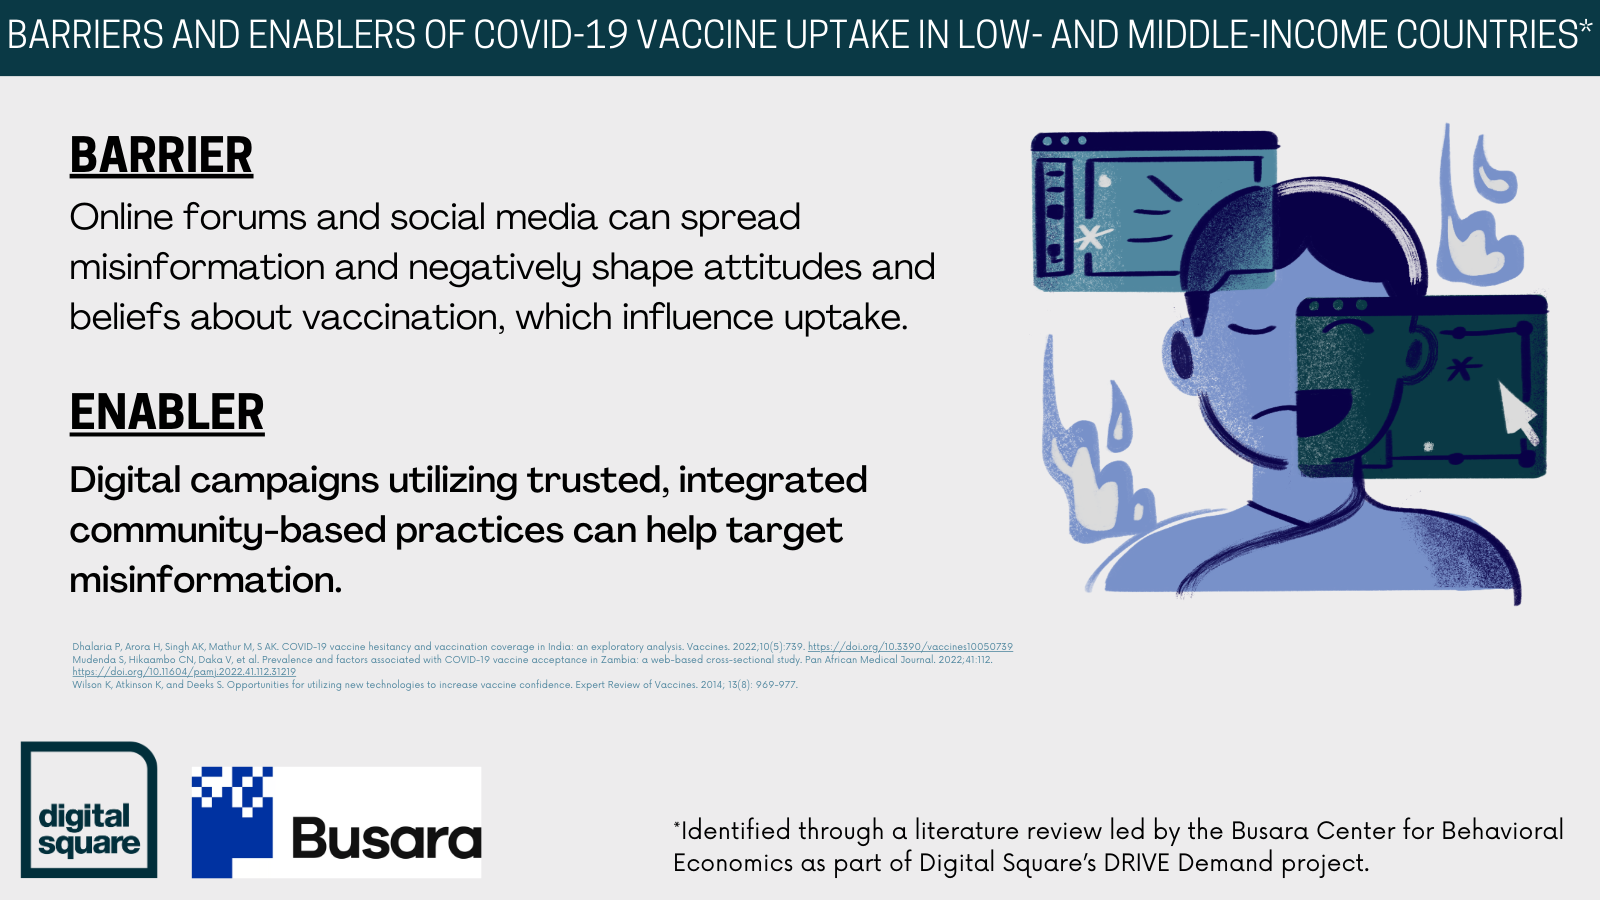  Sample tweet:  Digital forums like social media can have a major influence on attitudes and behaviors around vaccines. When using community-based practices, they can help build vaccine confidence. Learn more: https://ow.ly/QlTi50QeyY8 #digitalhealth